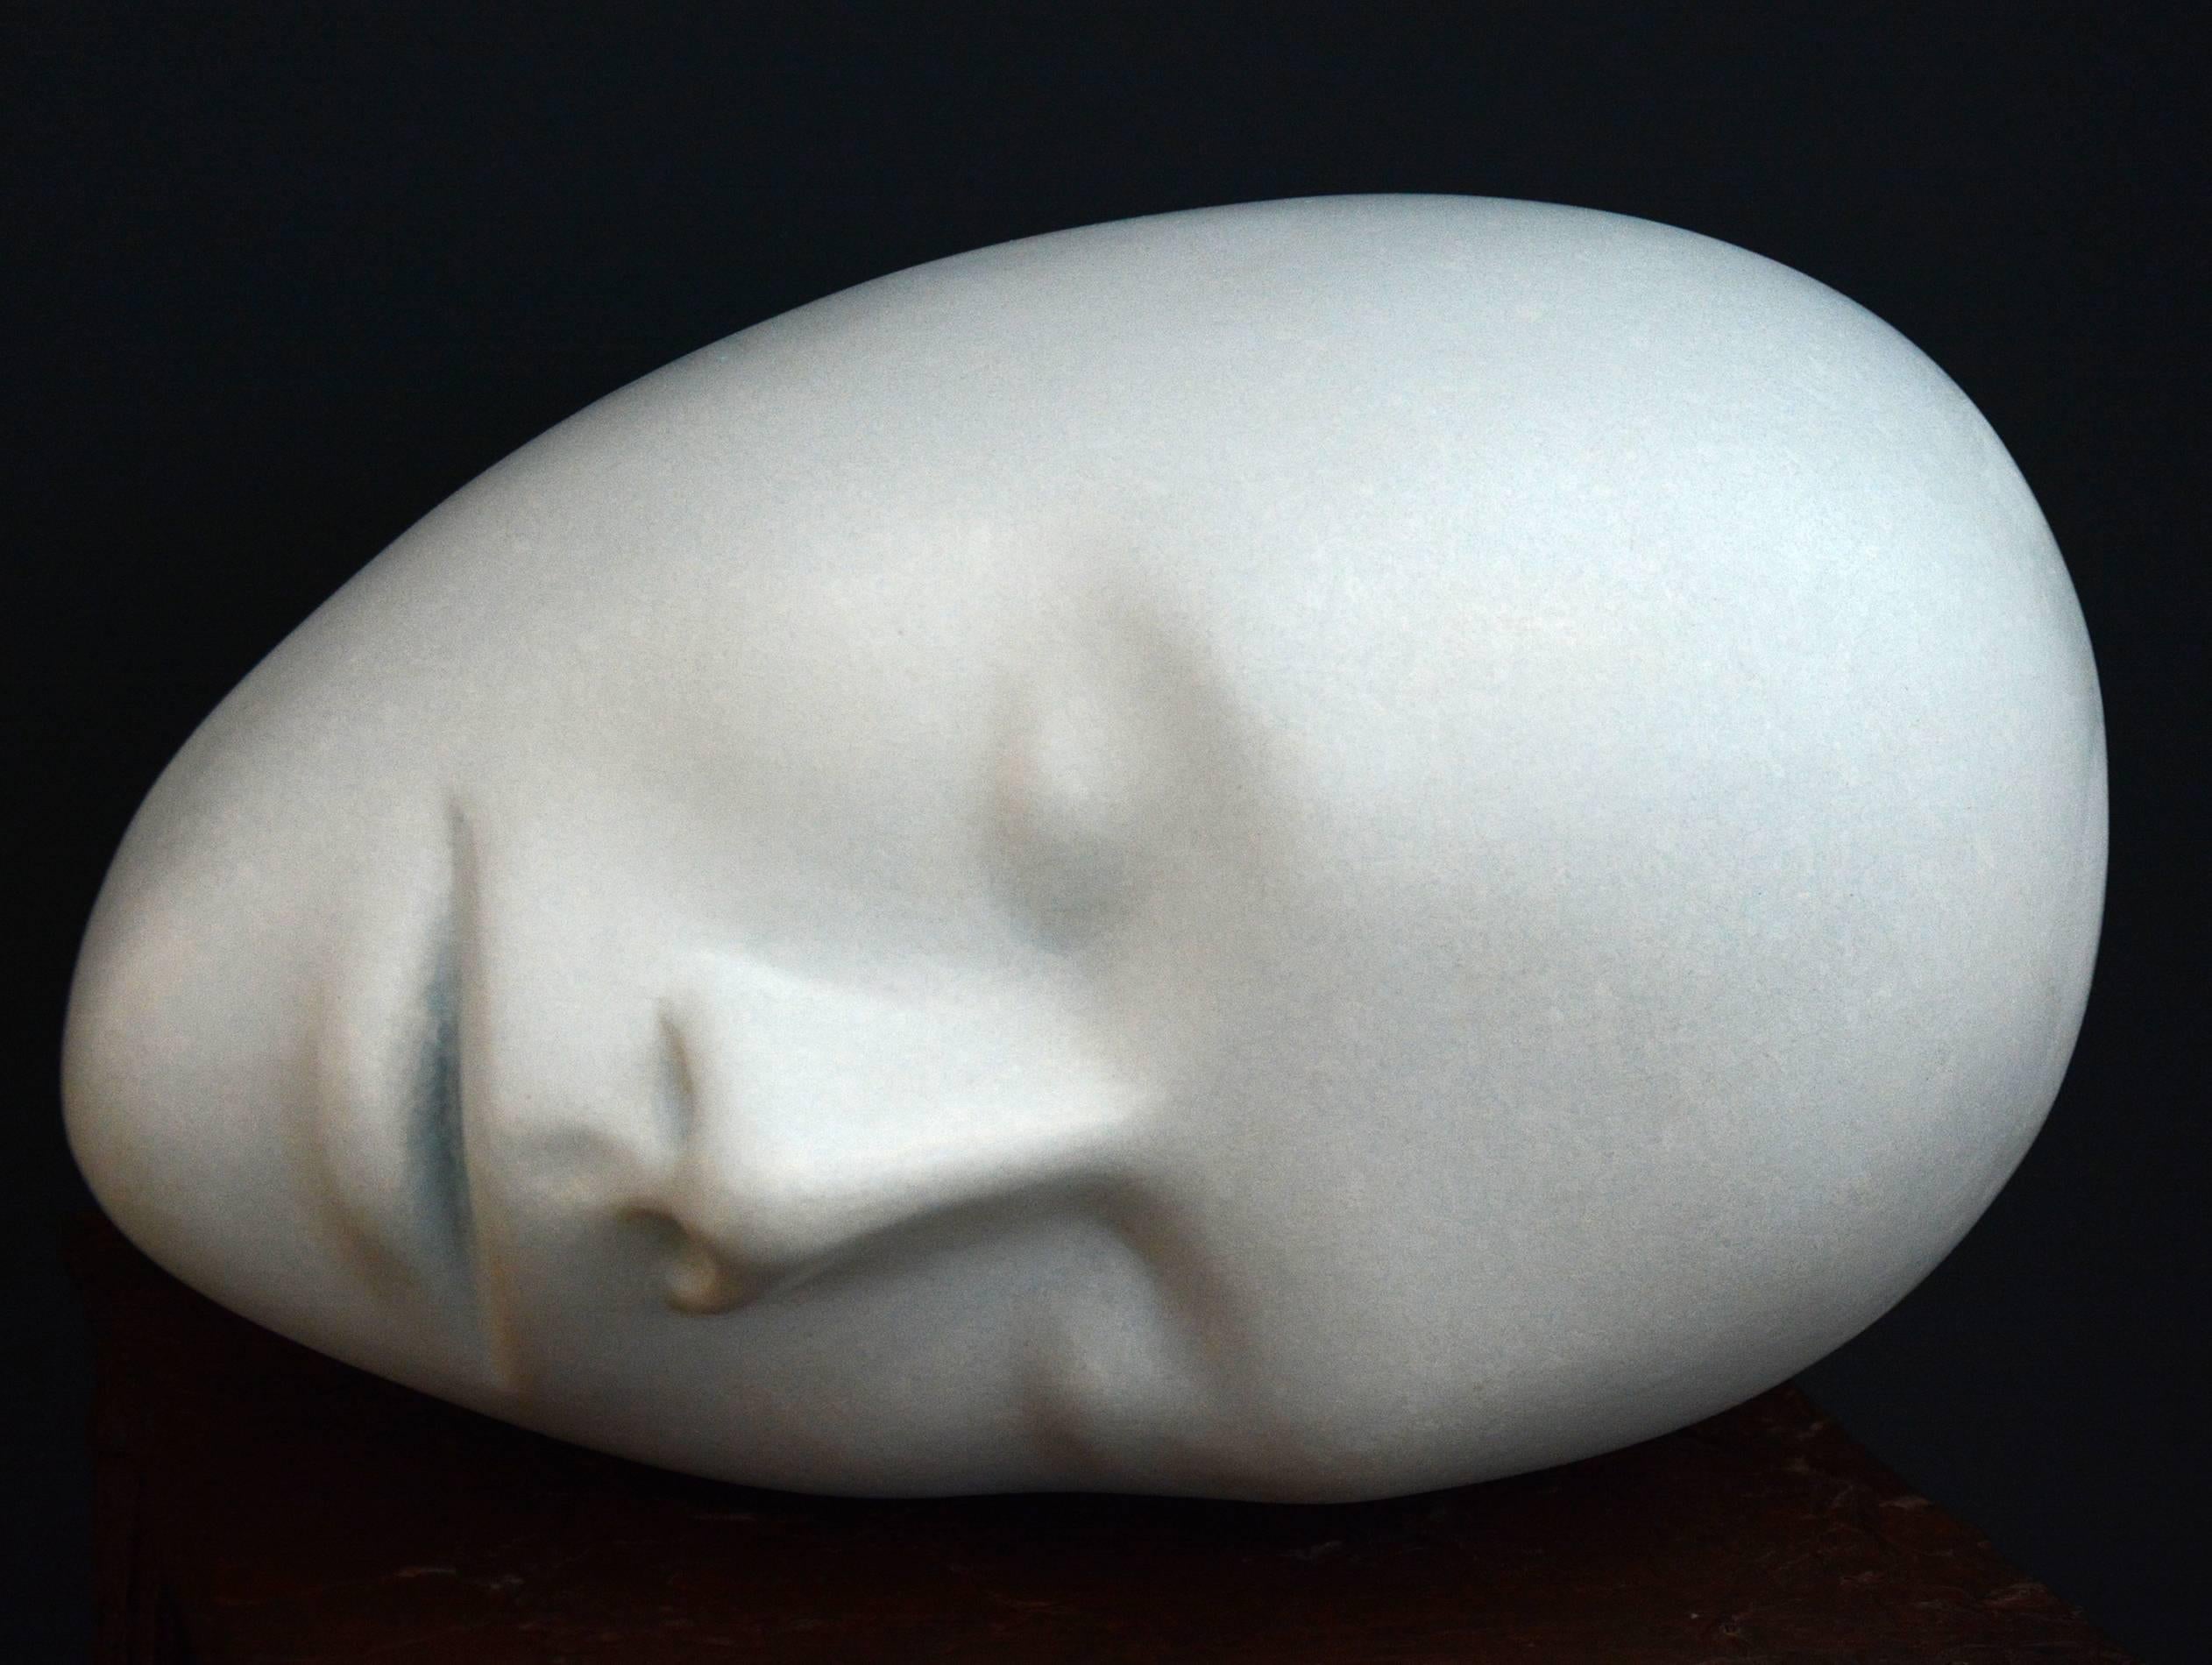 Whisper 3/7 - human face, narrative, patinated bronze figurative sculpture - Contemporary Sculpture by Dale Dunning